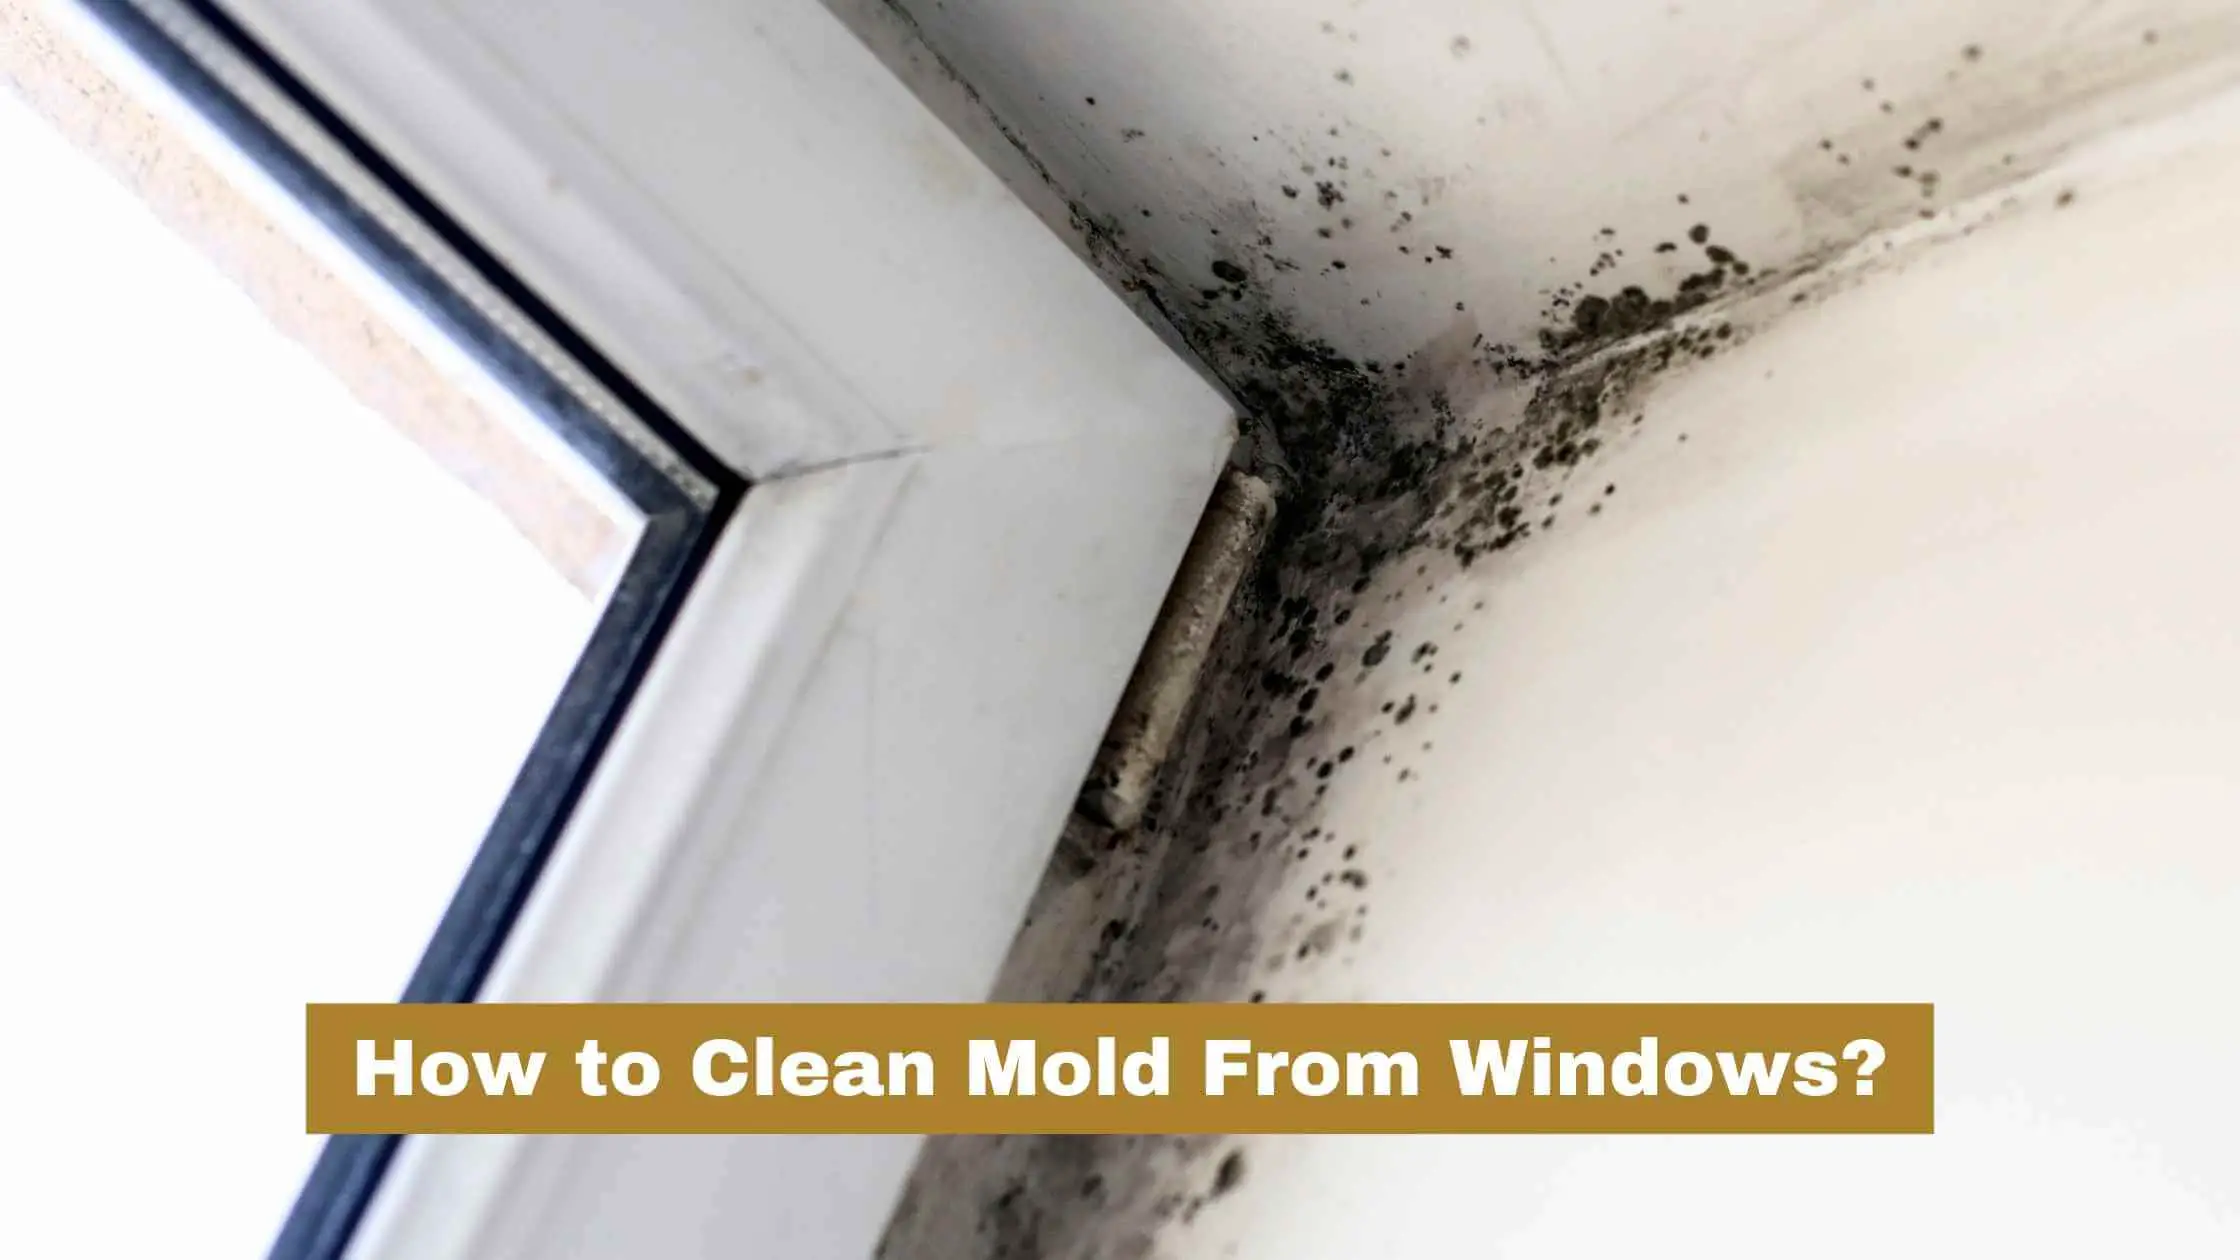 How to Clean Mold From Windows